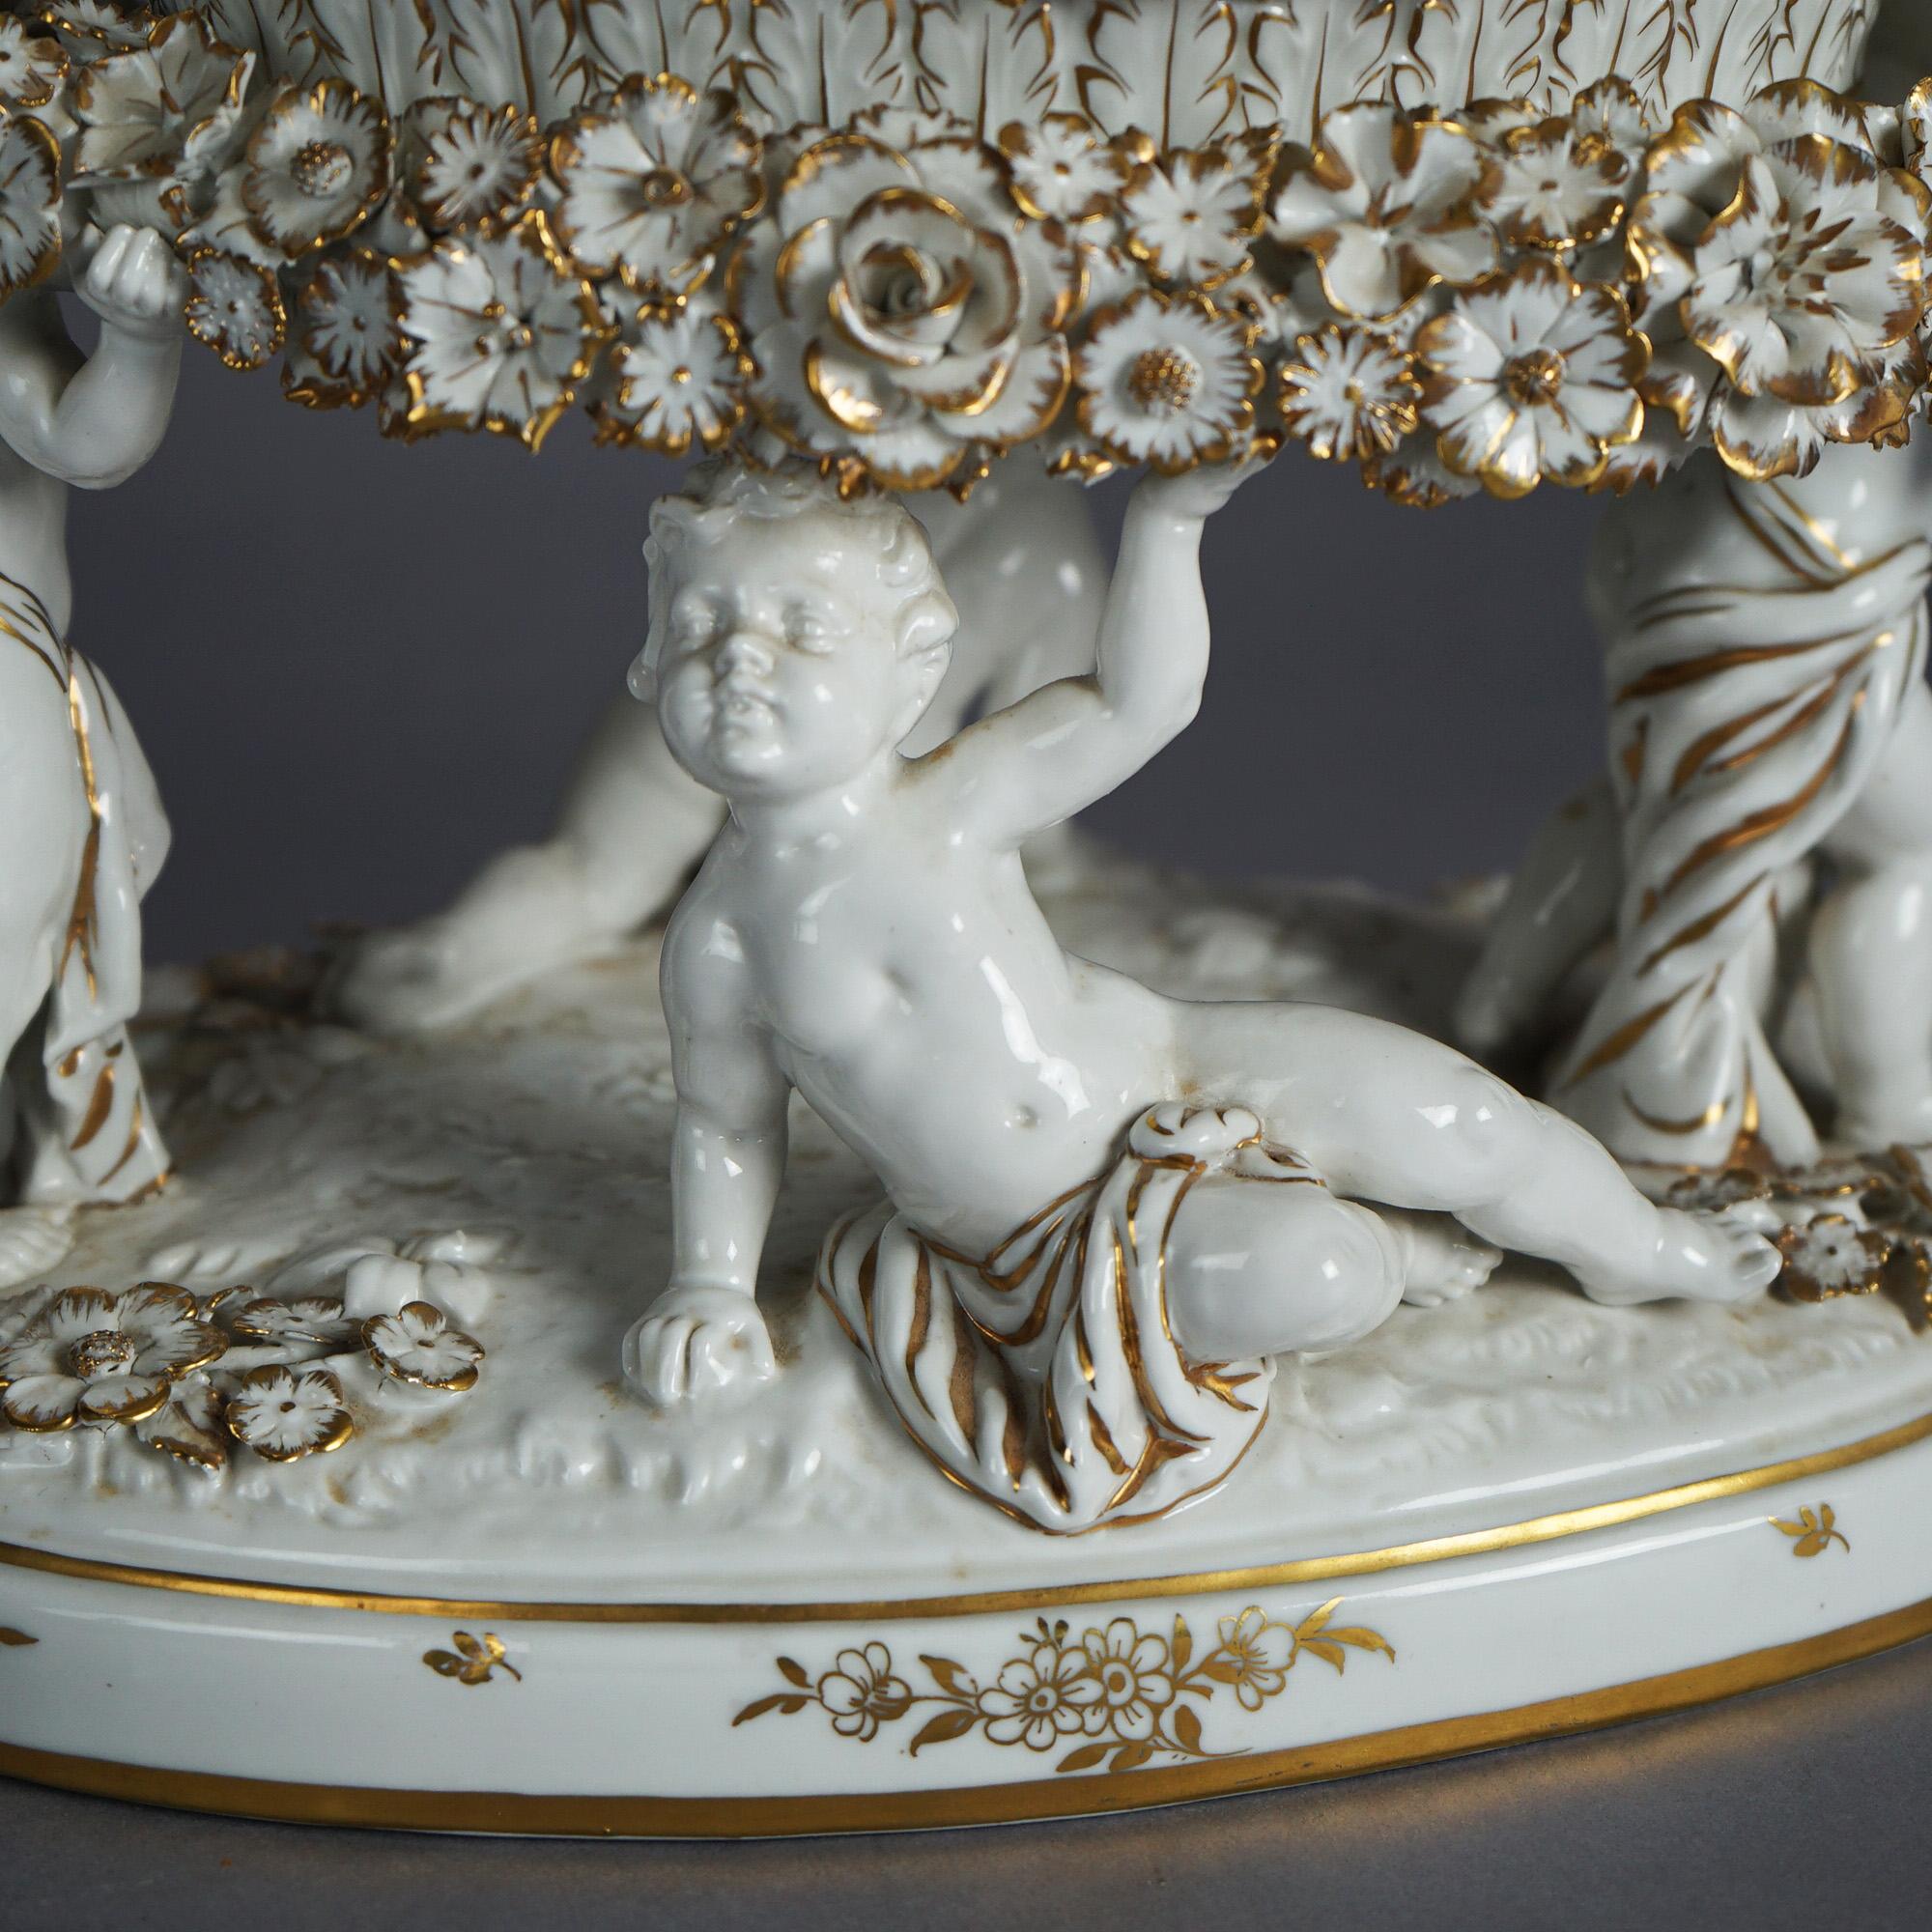 An antique German Schierholz center bowl offers porcelain construction with upper basket having reticulated rim over figural base with cherubs, gilt highlights throughout, c1920

Measures - 9.5